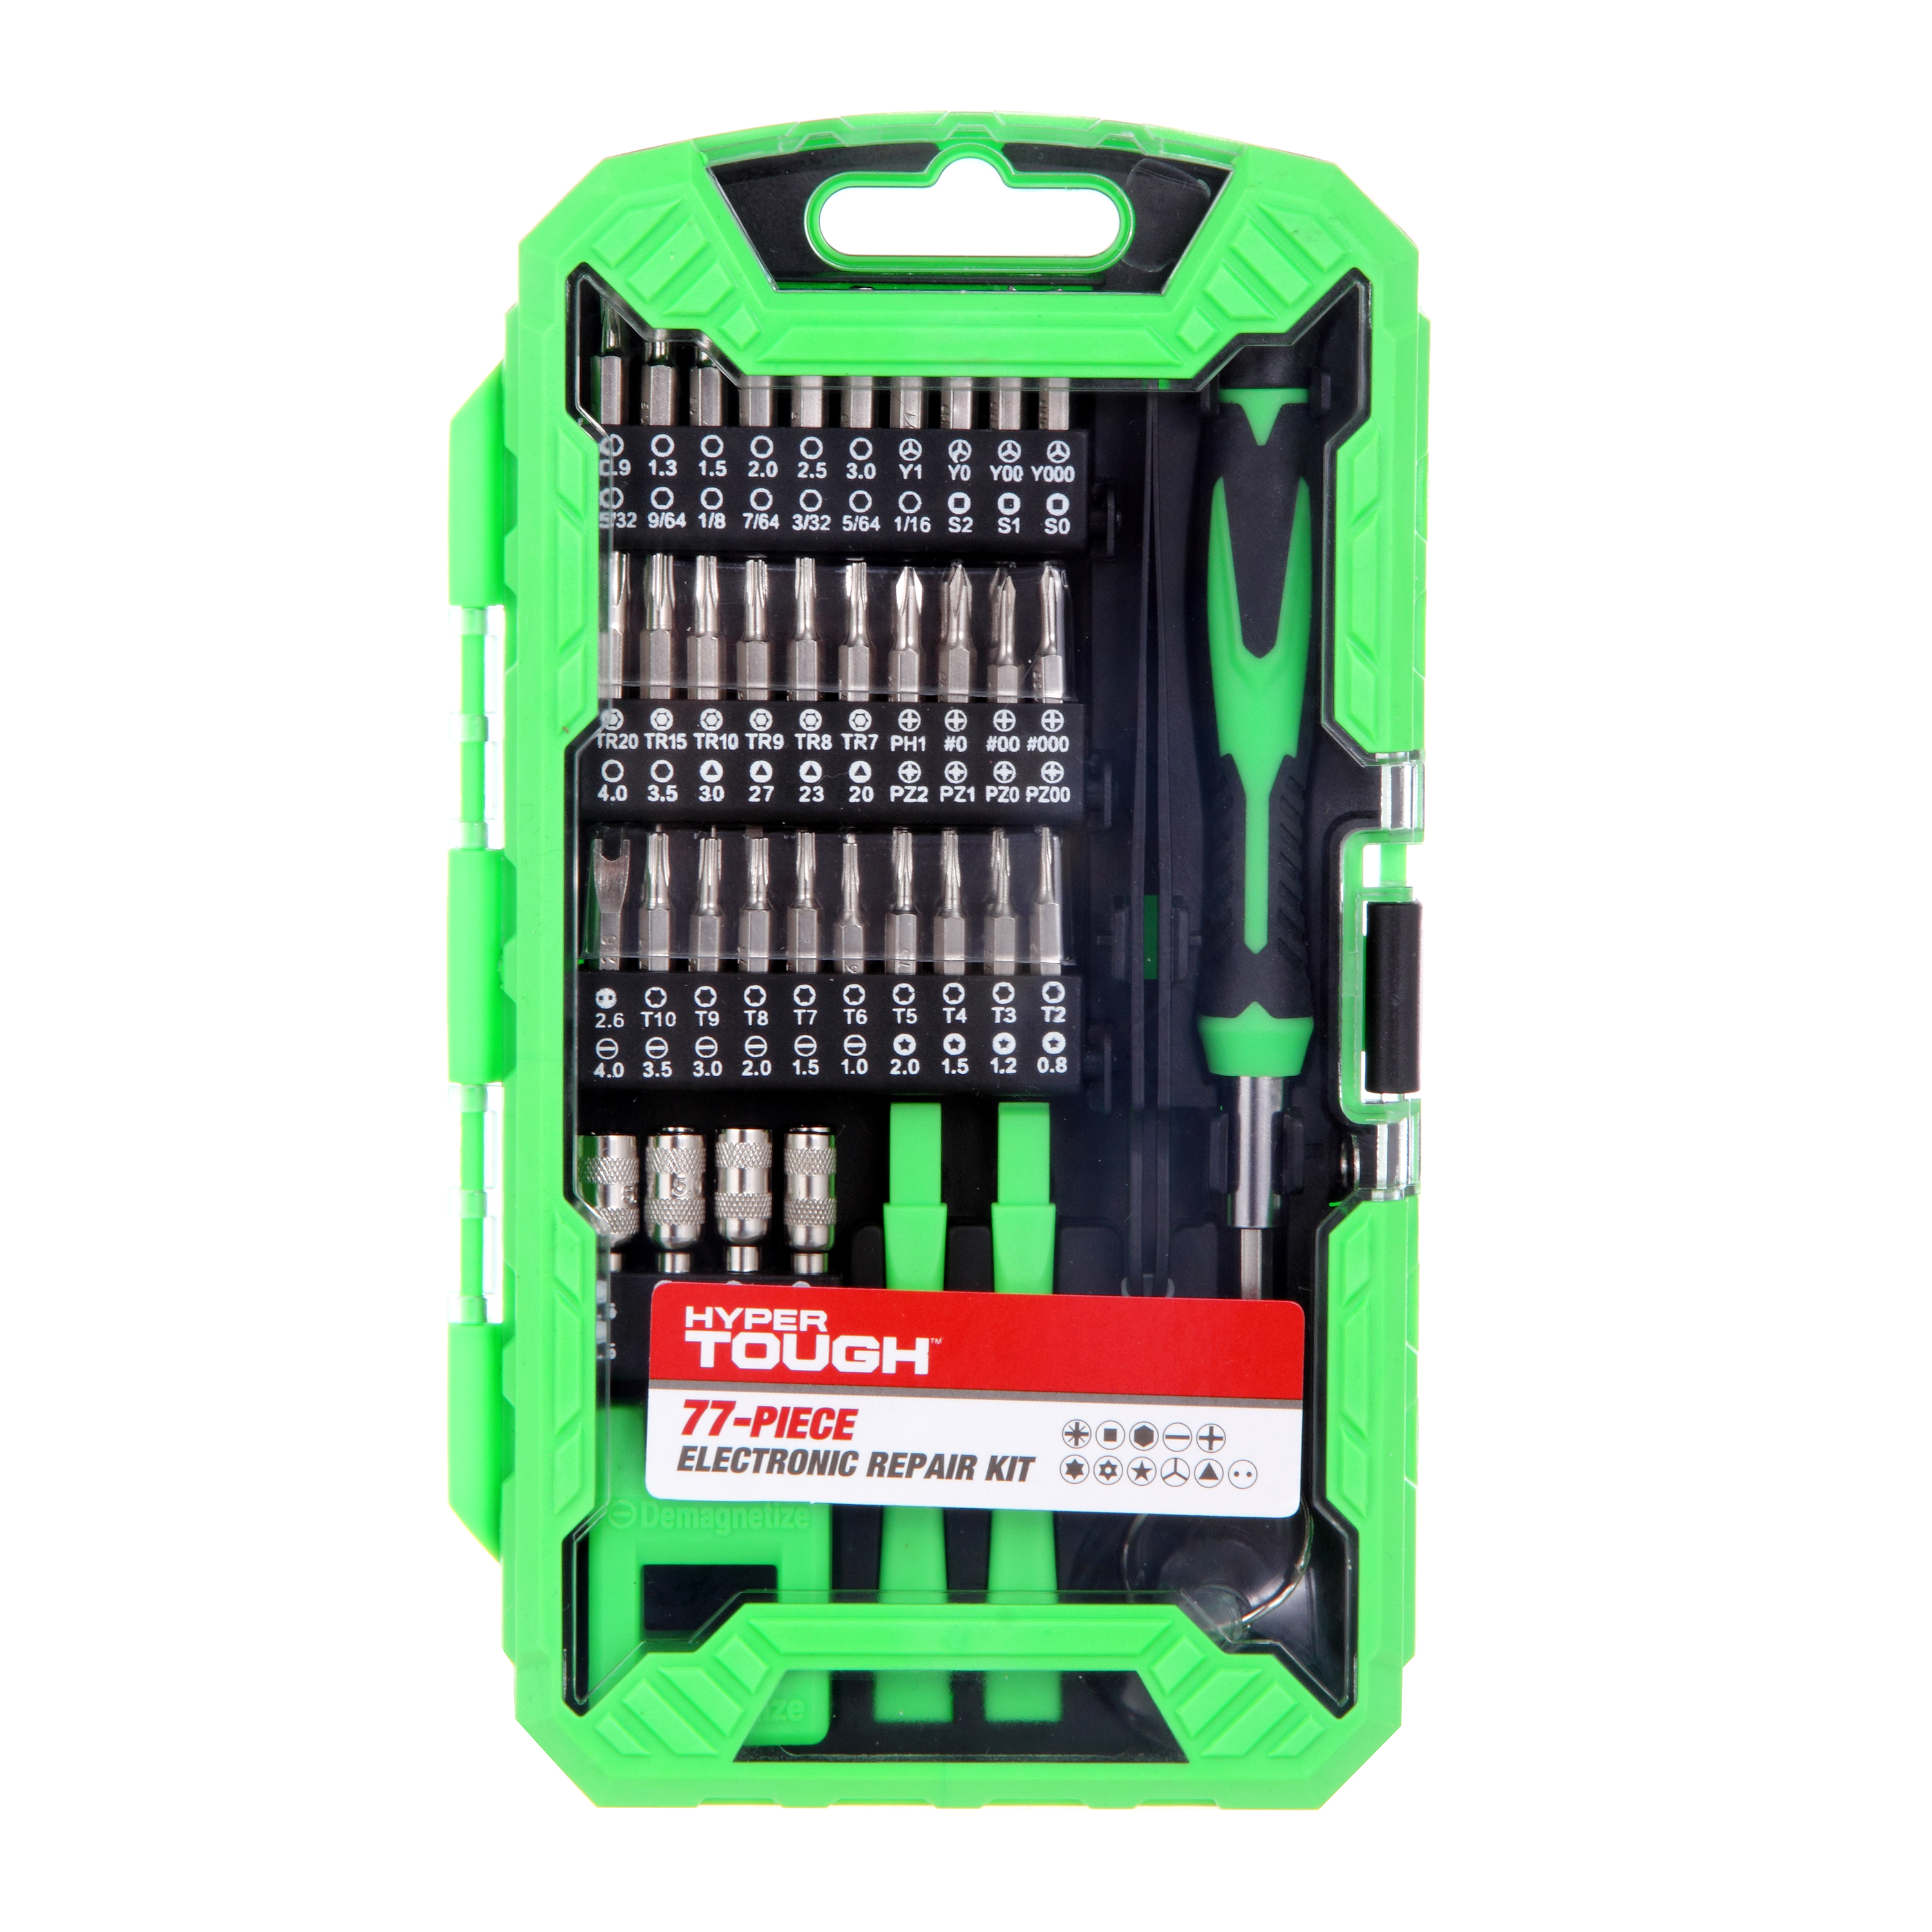 Hyper Tough 77 Piece Computer Repair Kit with Precision Bits and Storage Case TS85134A - image 4 of 9